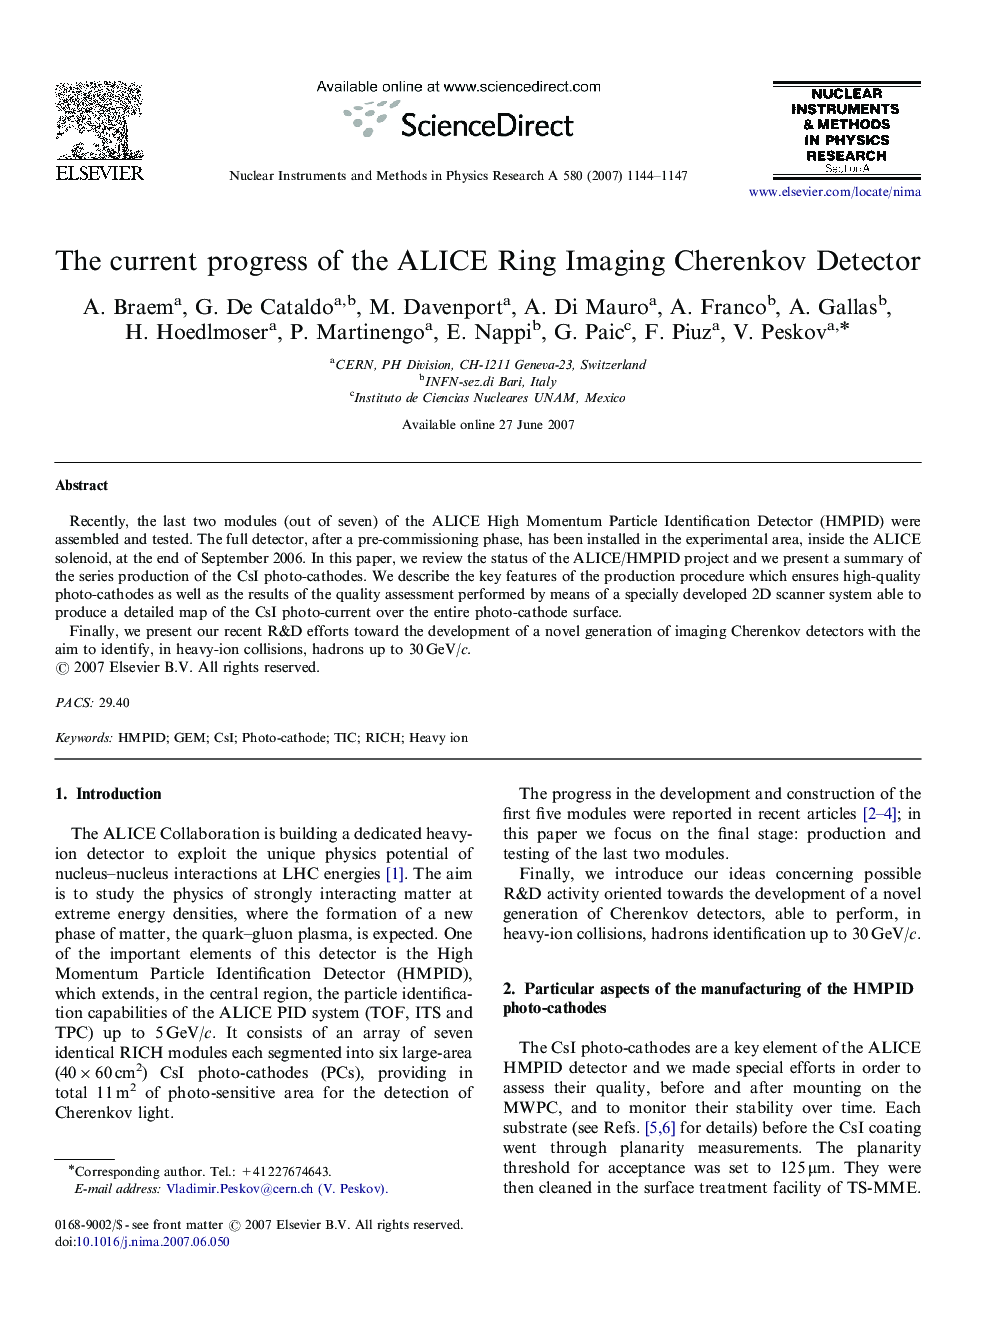 The current progress of the ALICE Ring Imaging Cherenkov Detector